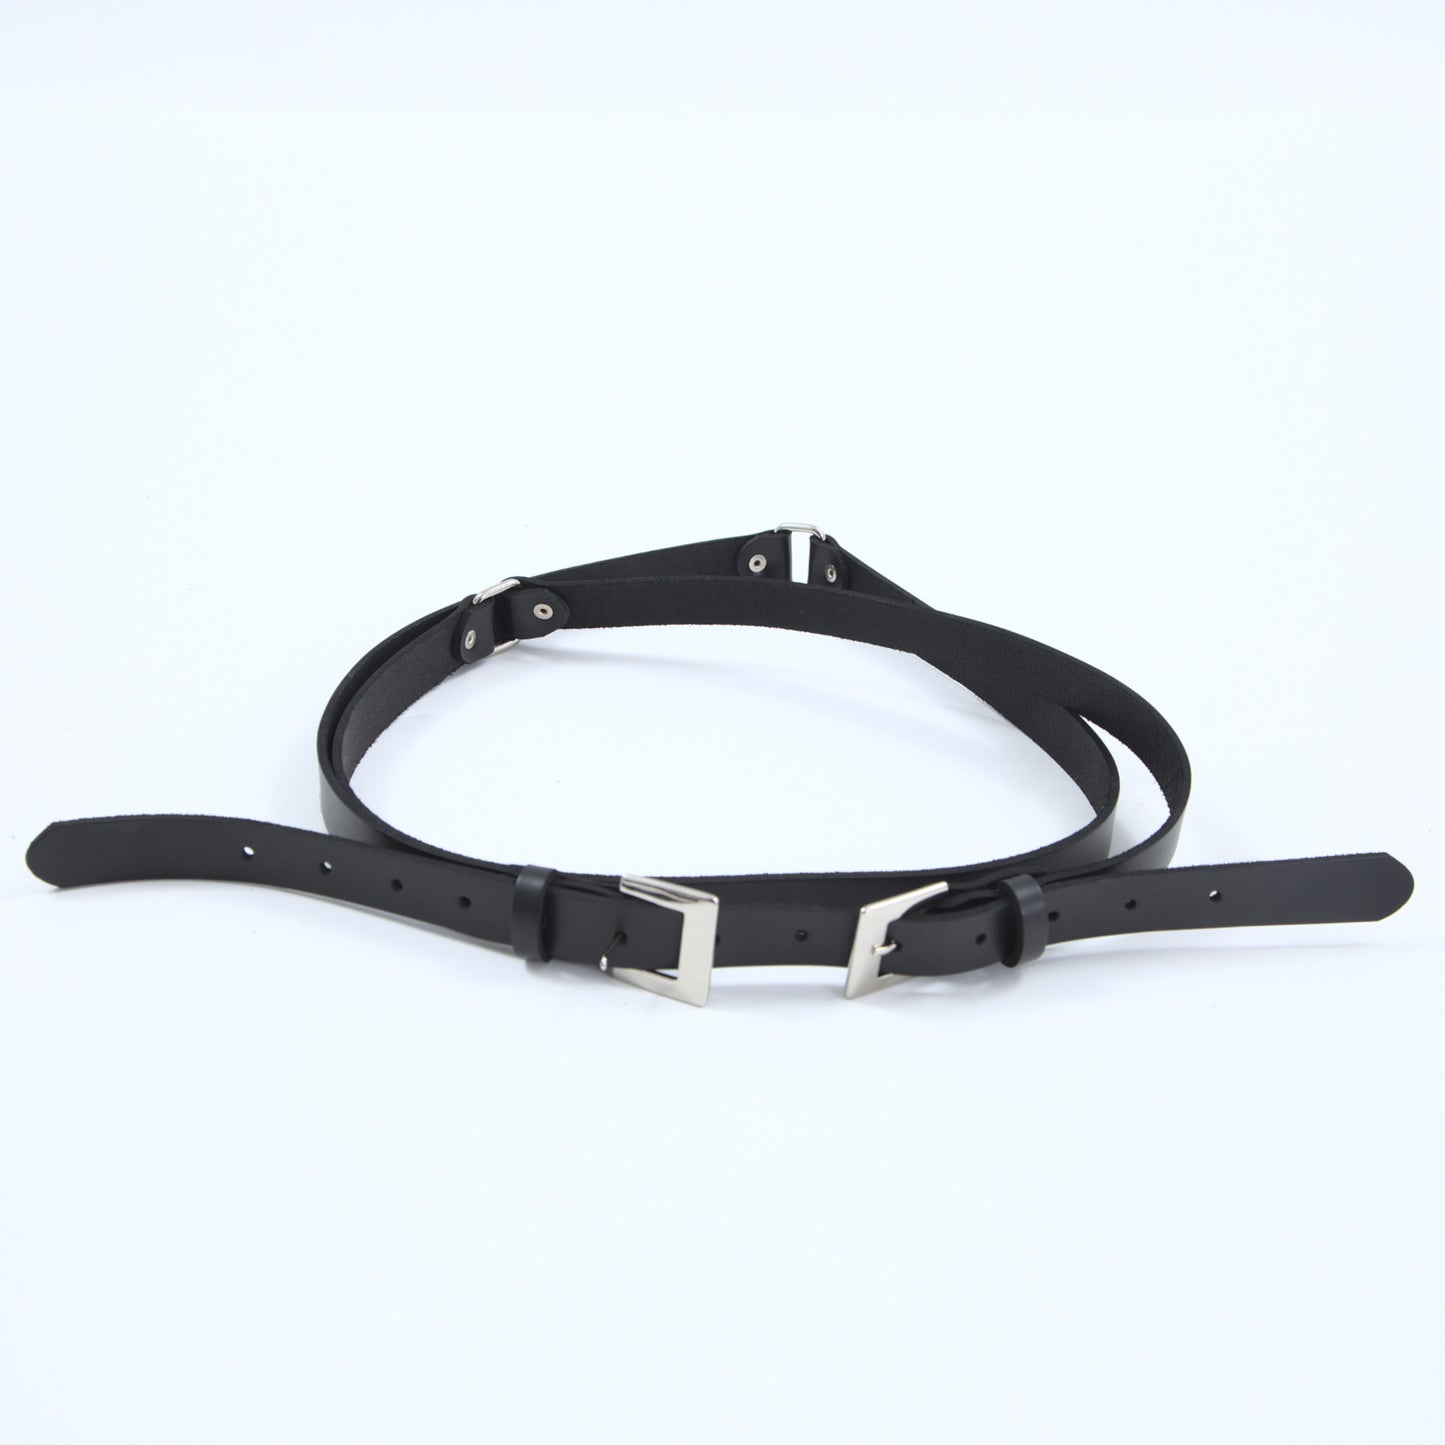 2-lap leather belt with metal buckles